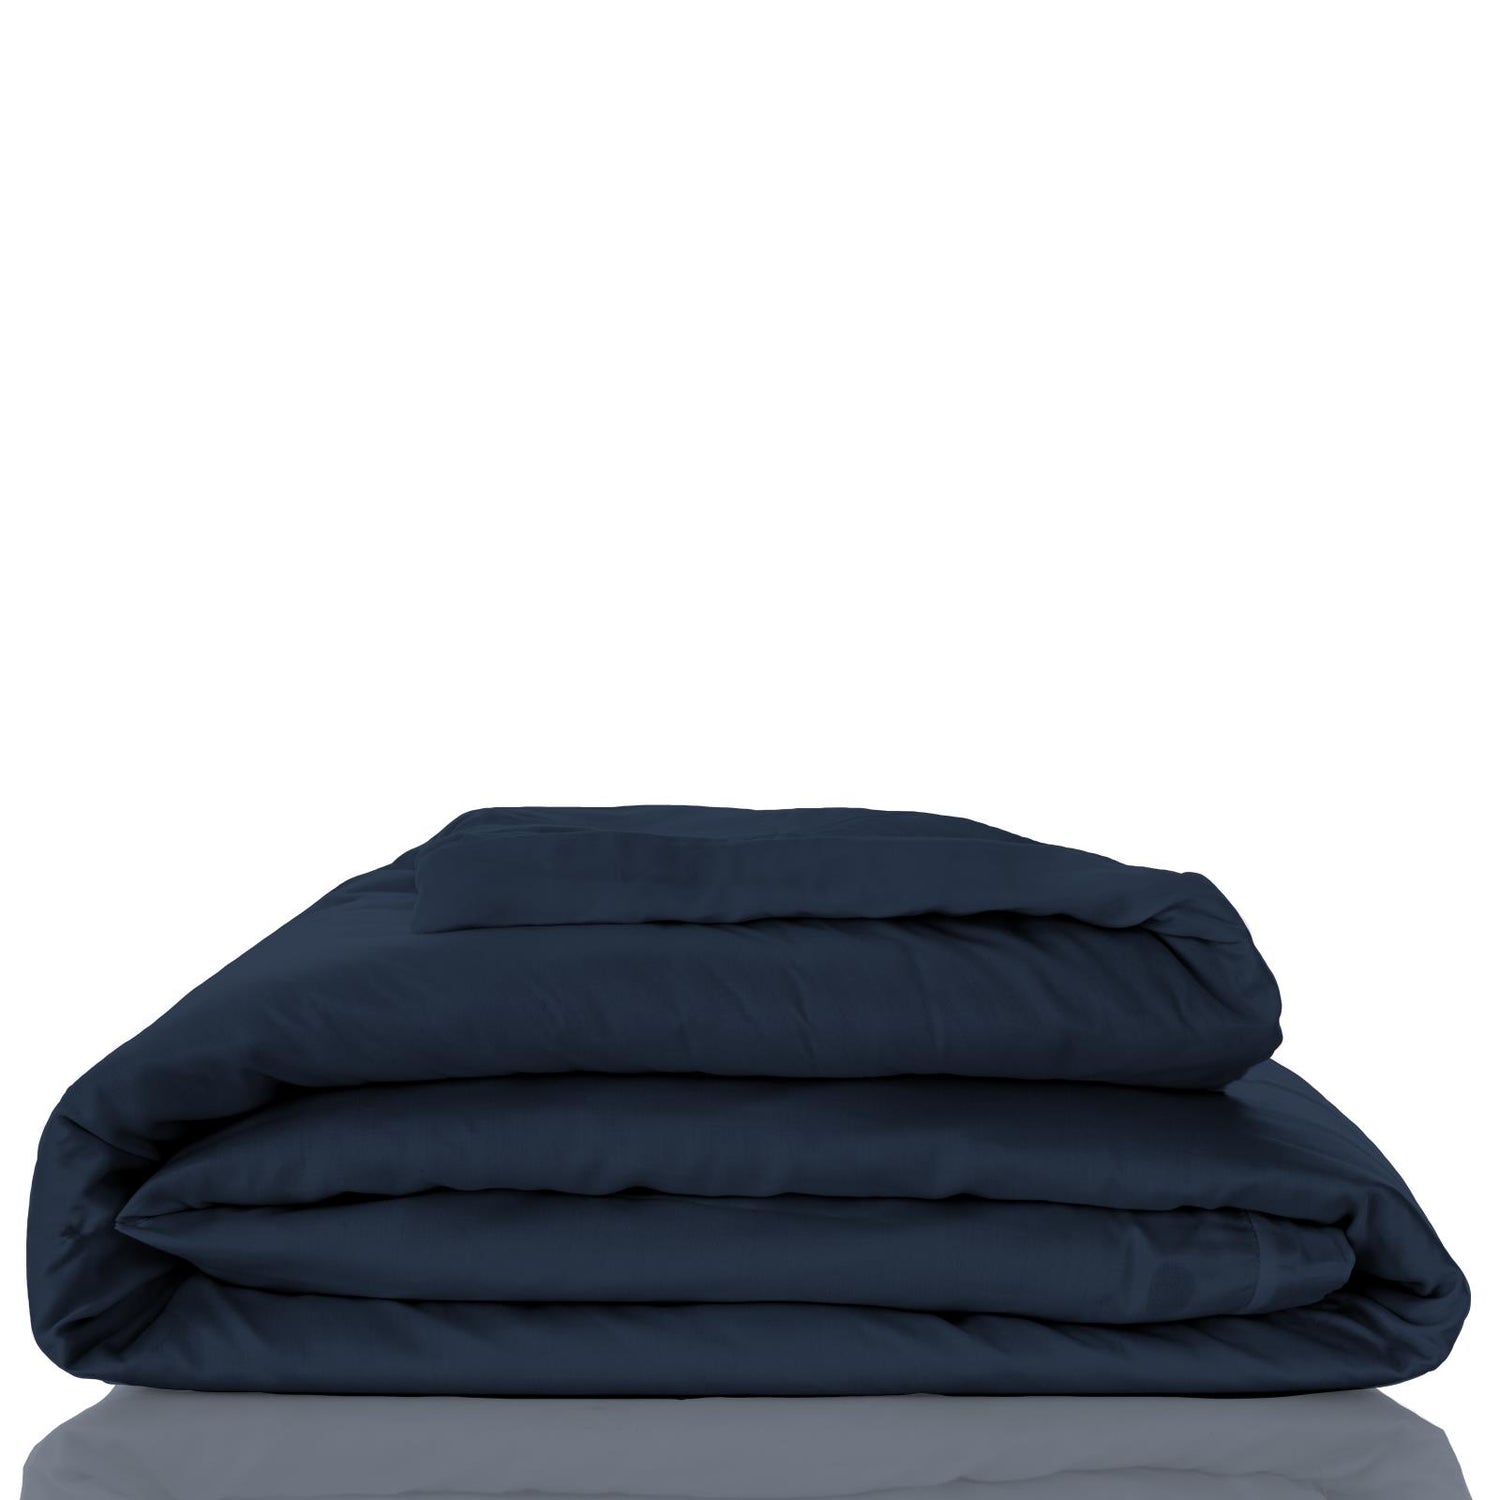 Woven Duvet Cover in Suede Blue